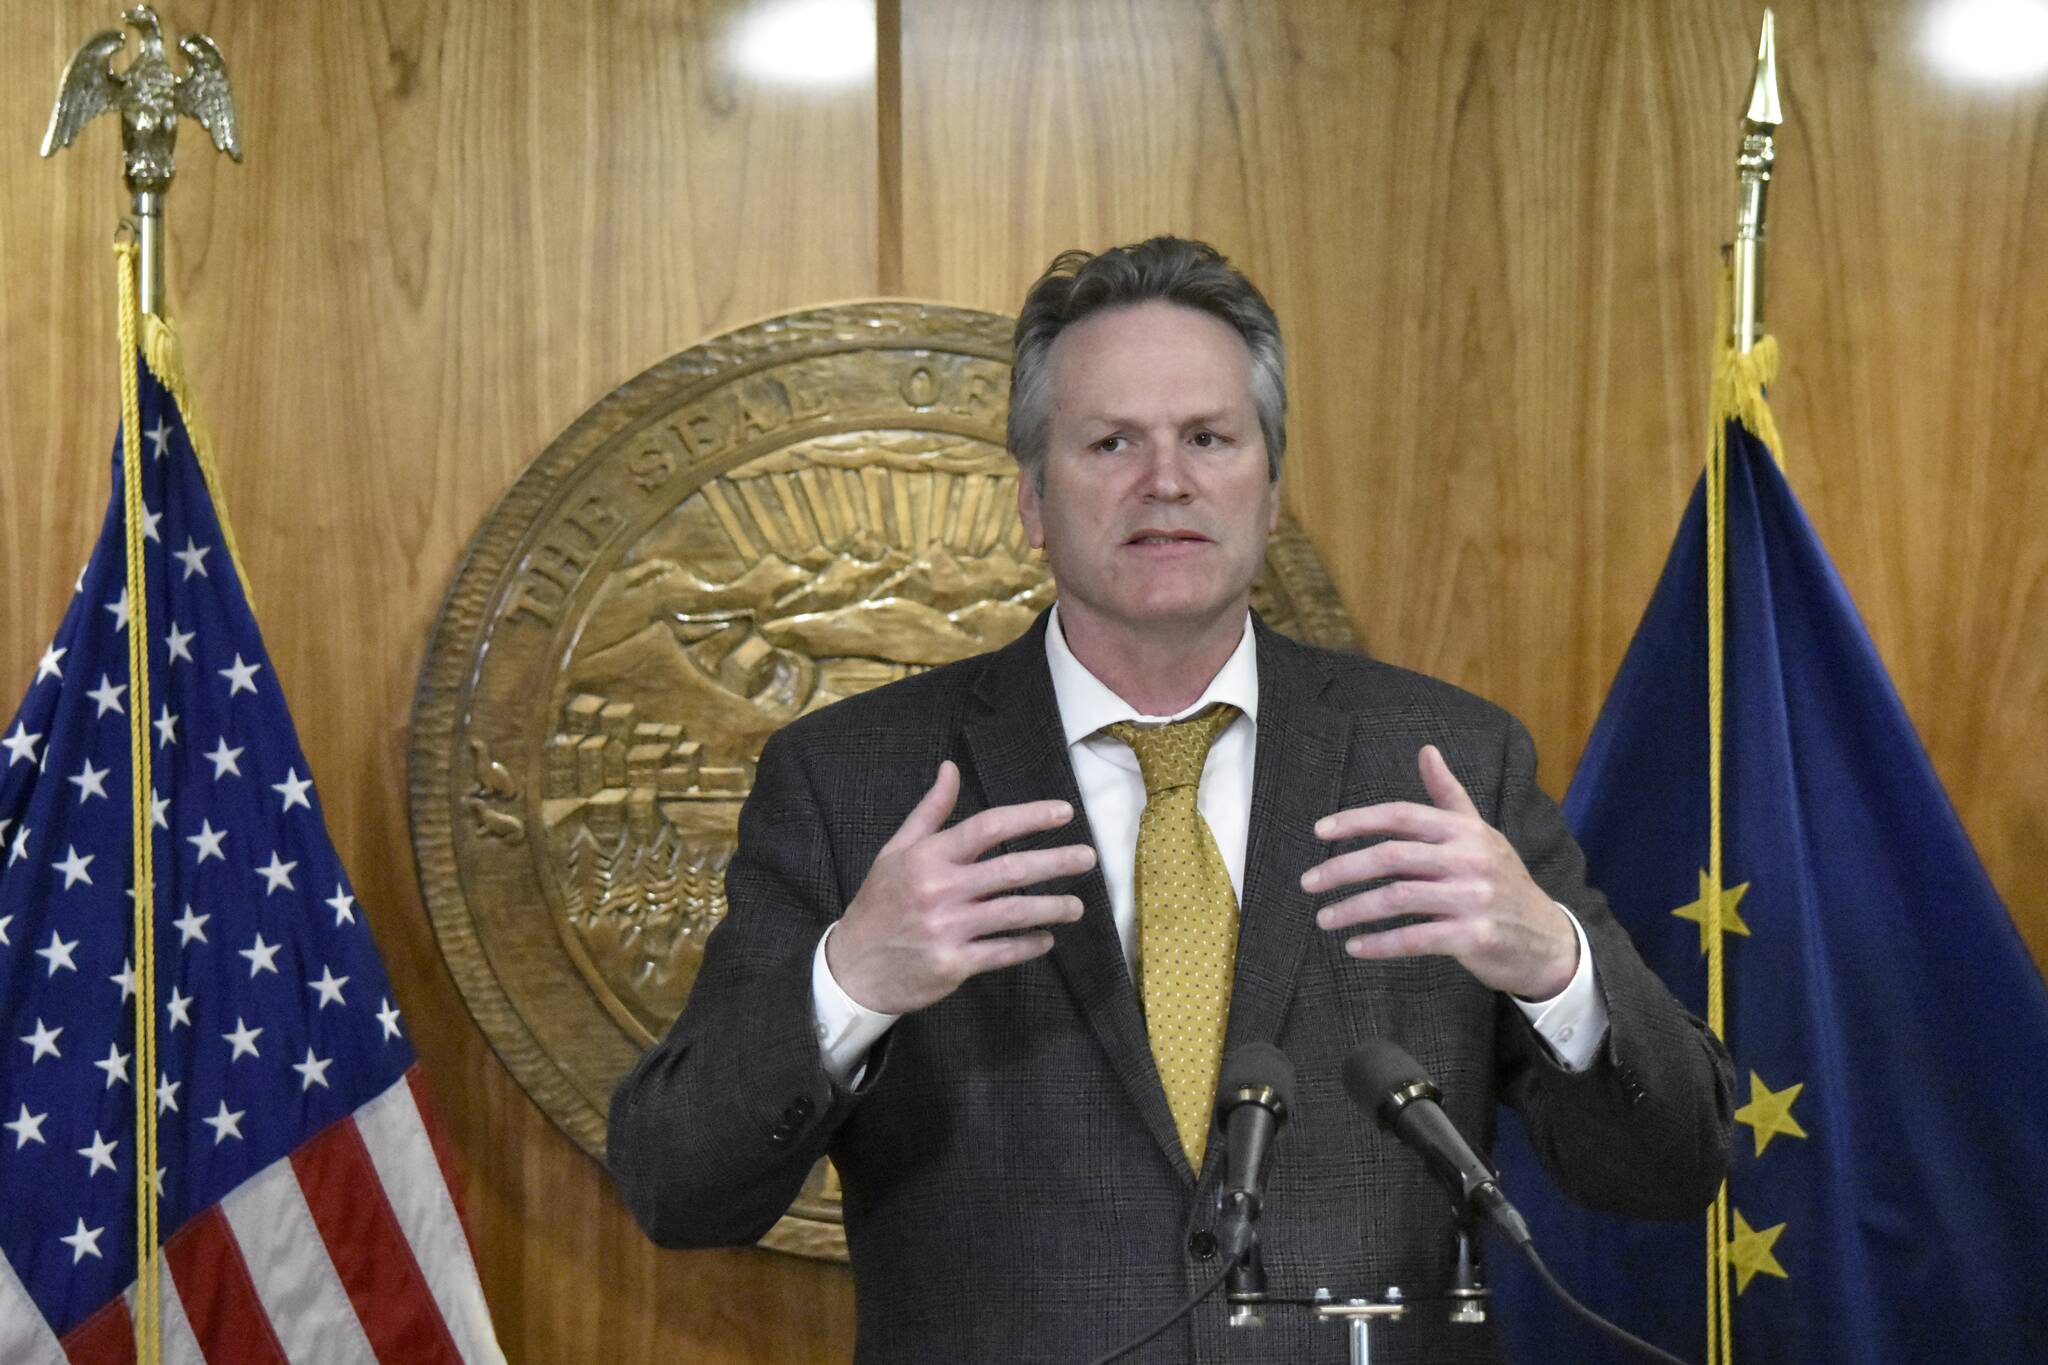 Gov. Mike Dunleavy speaks with reporters about the state's budget at the Alaska State Capitol on Thursday, May 19, 2022. The governor said lawmakers had sent a complete budget, and that there was no need for a special session. (Peter Segall / Juneau Empire)